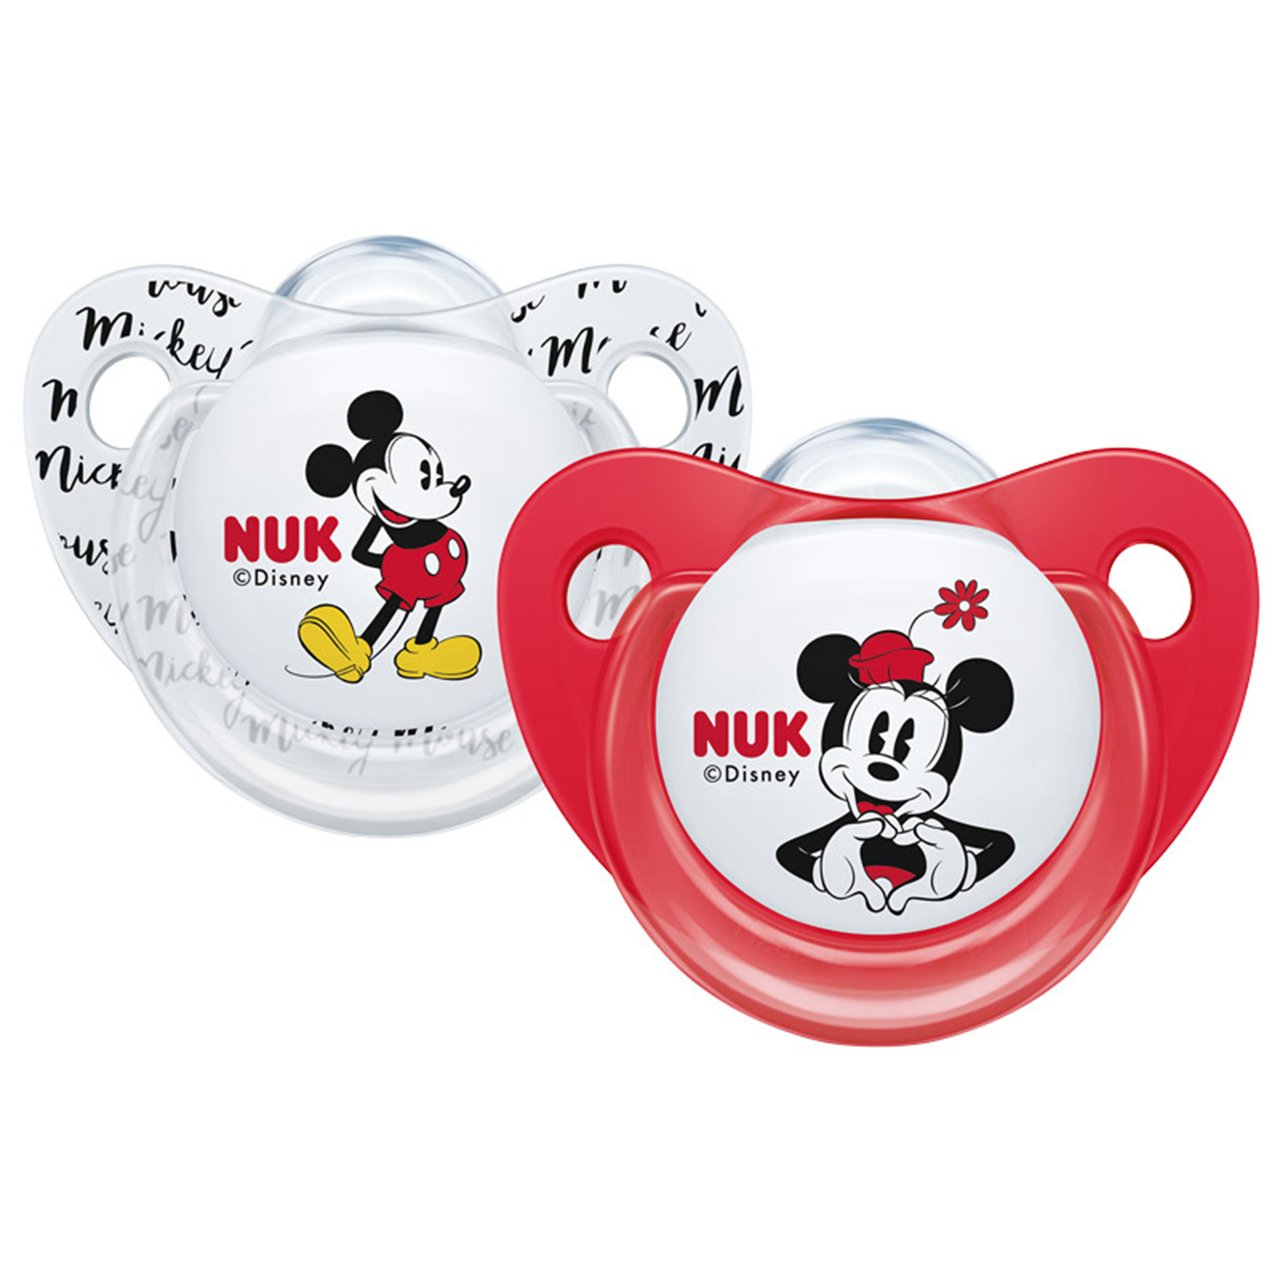 Nuk Disney Mickey And Minnie Twin Pack Soother Silicone Teat Size 2 6-18 Months